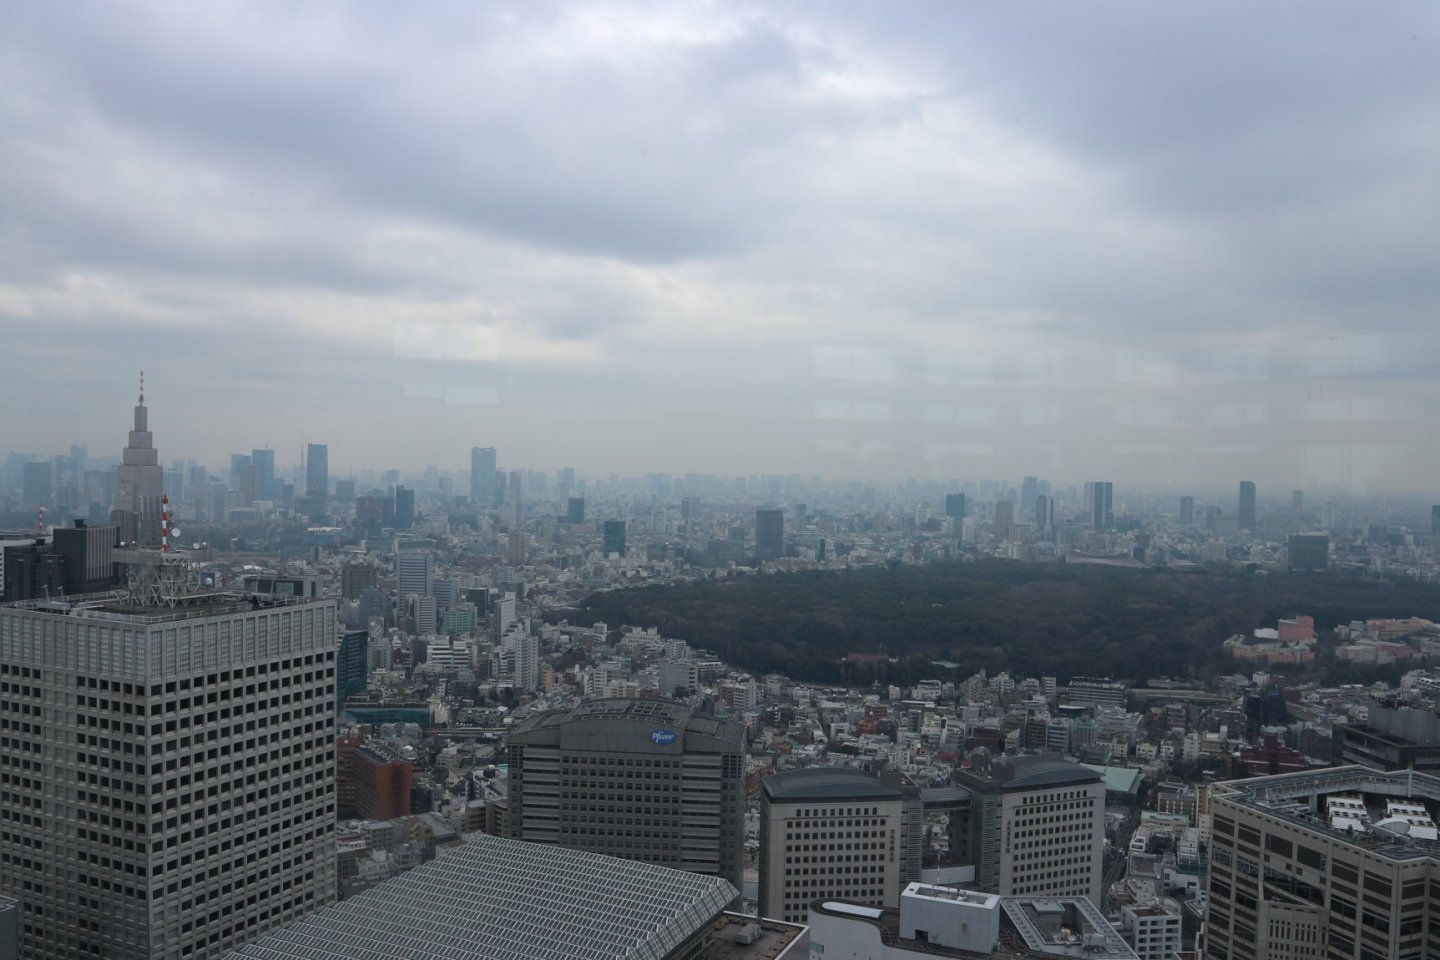 The View from the Tokyo Metropolian Building